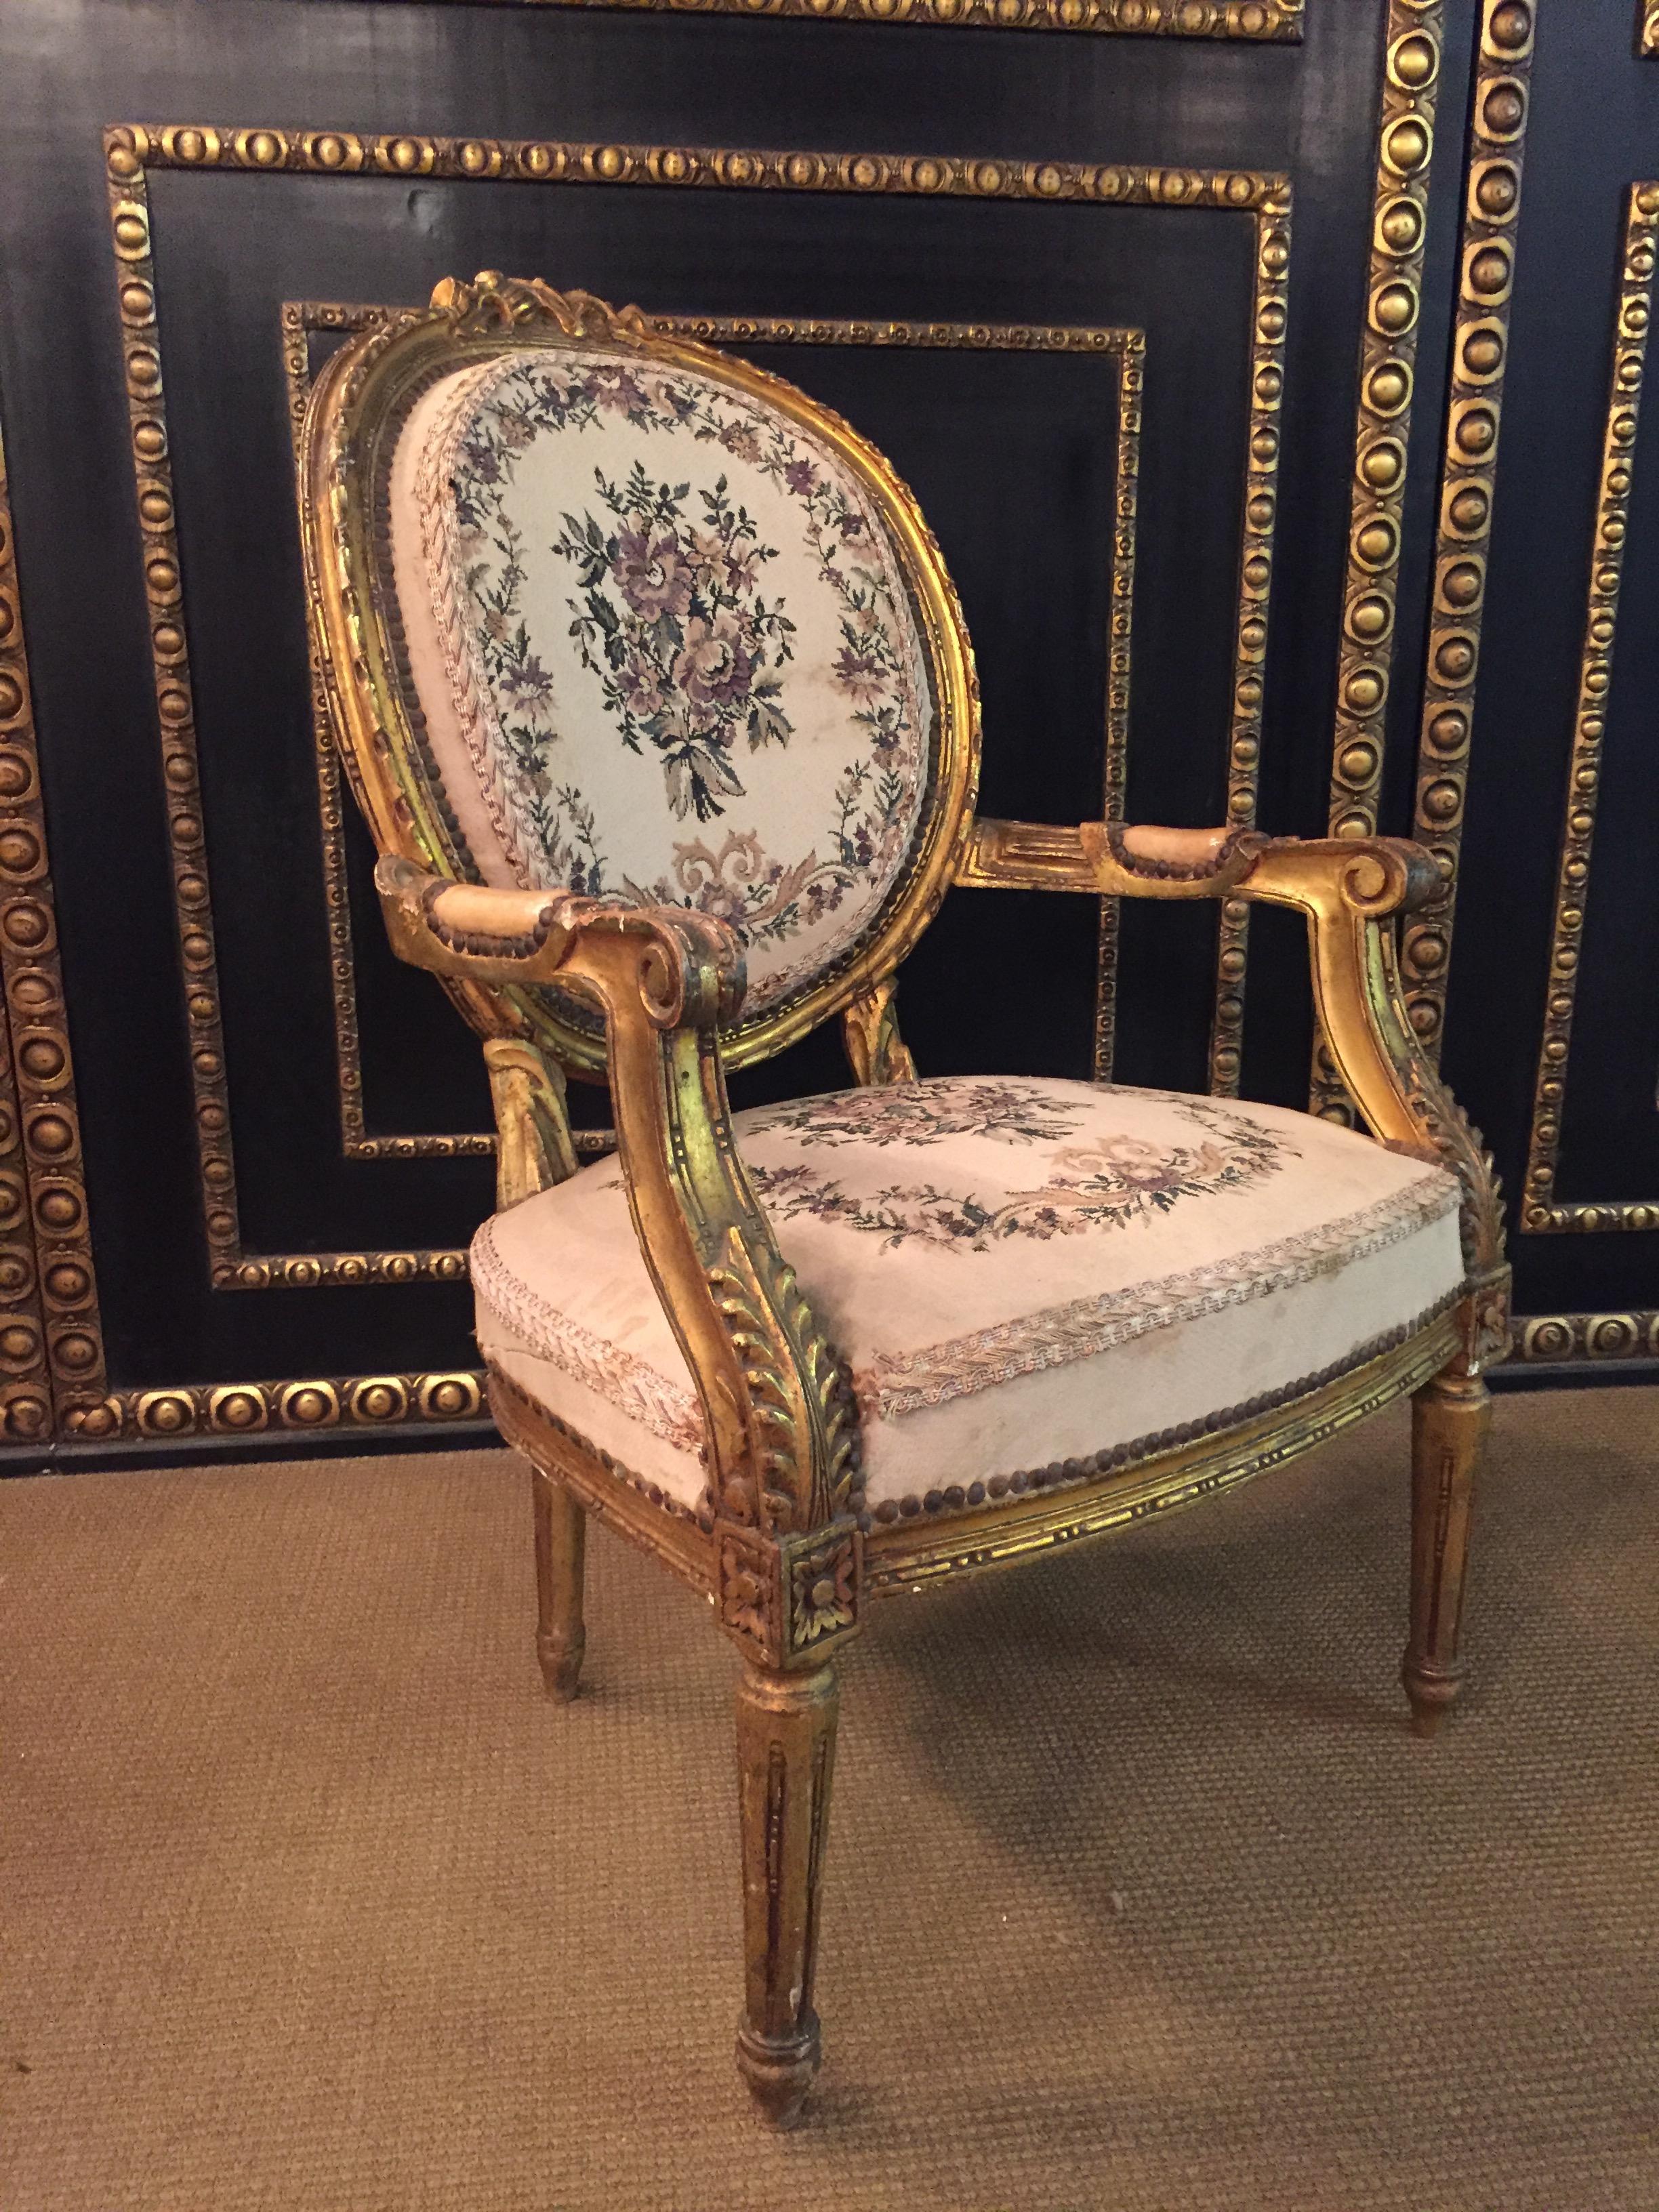 Louis XVI Armchair in Antique Louis Seize Style, Tapestry Fabric Gildet beech carved